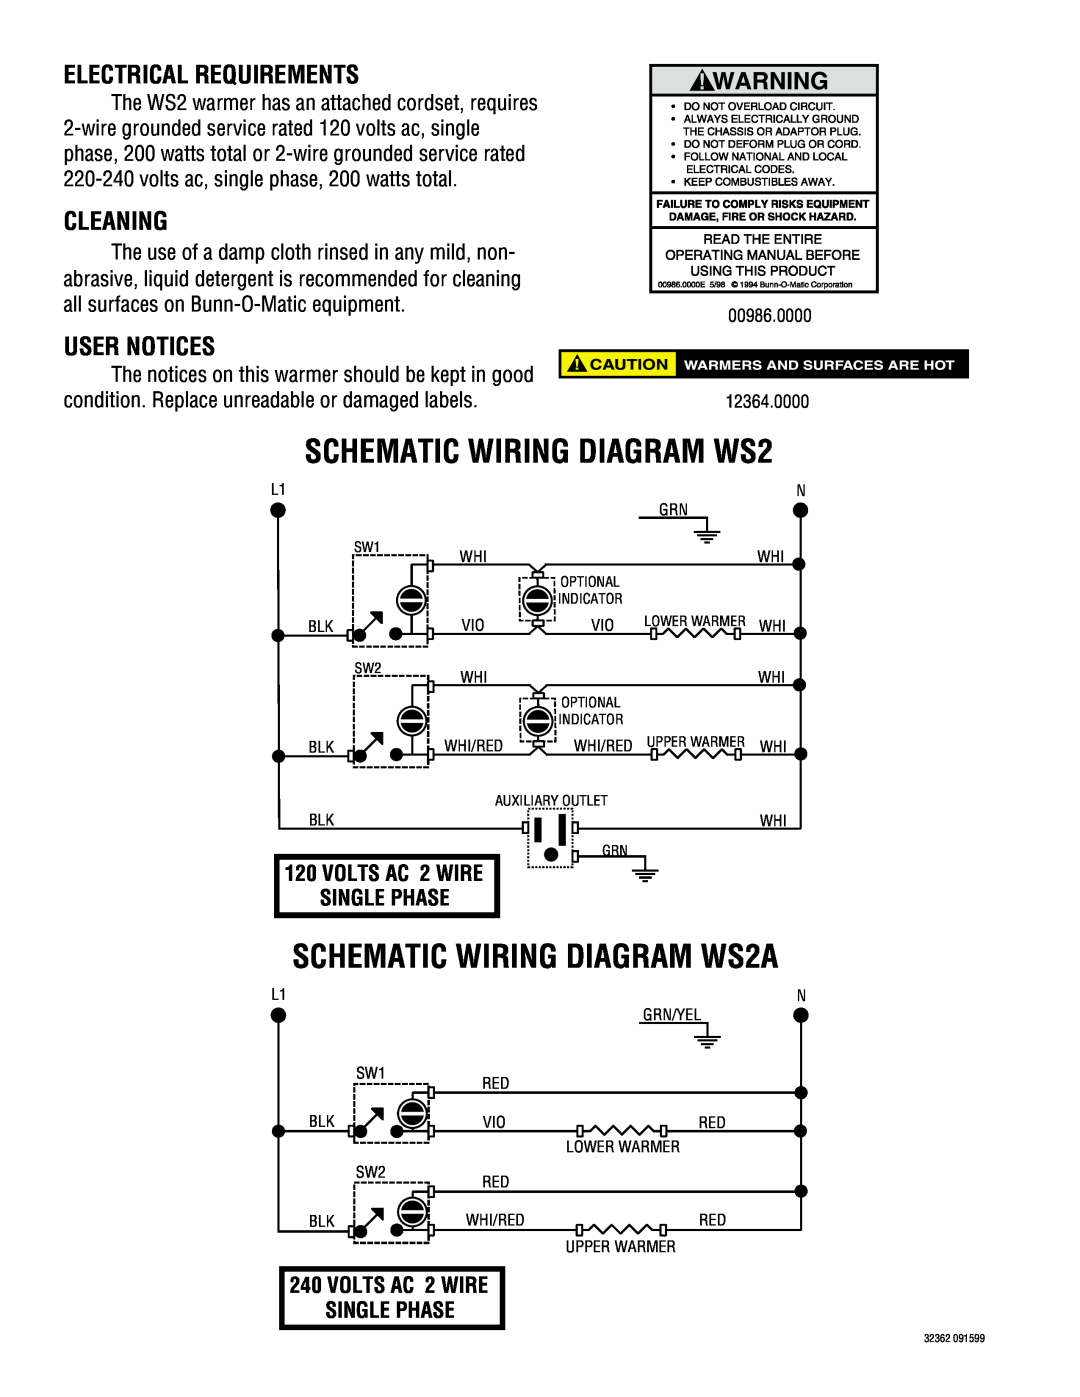 Bunn Electrical Requirements, Cleaning, User Notices, SCHEMATIC WIRING DIAGRAM WS2A, VOLTS AC 2 WIRE SINGLE PHASE 